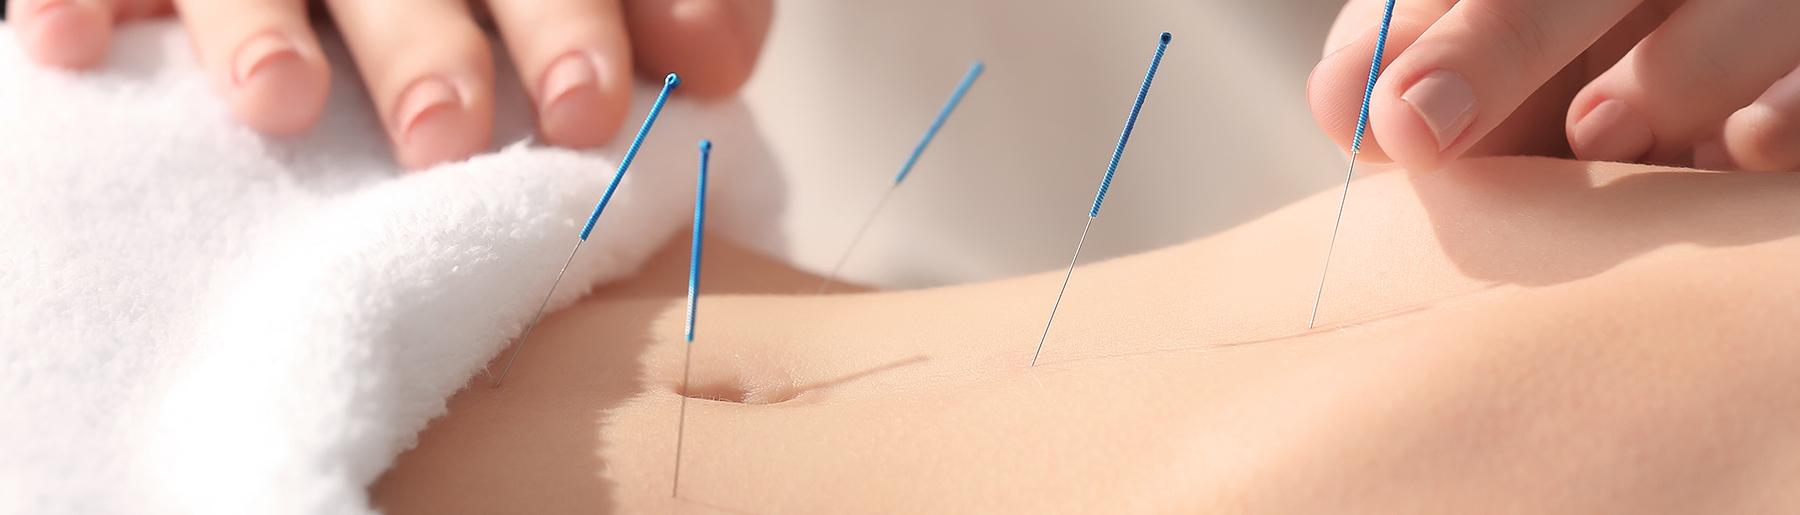 hands placing acupuncture needles